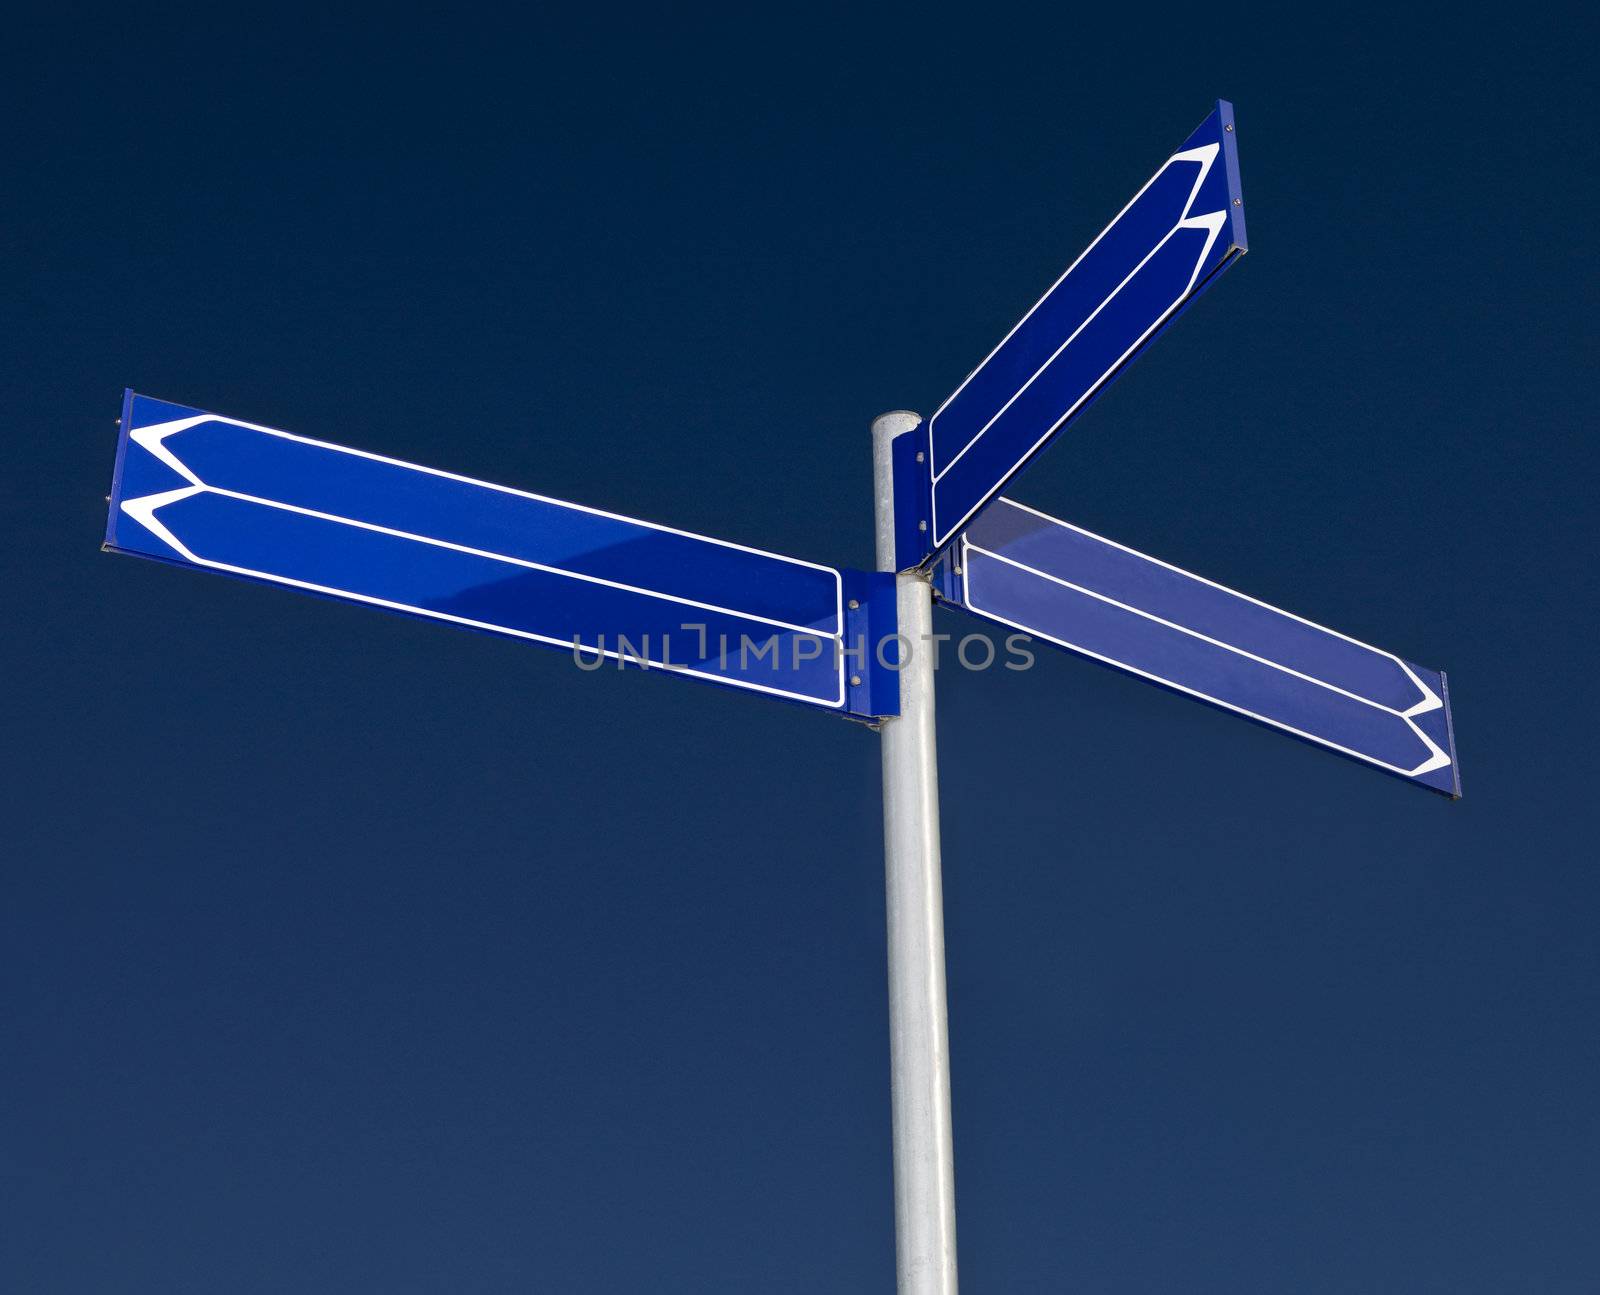 Blank signpost with six arrows against a blue background